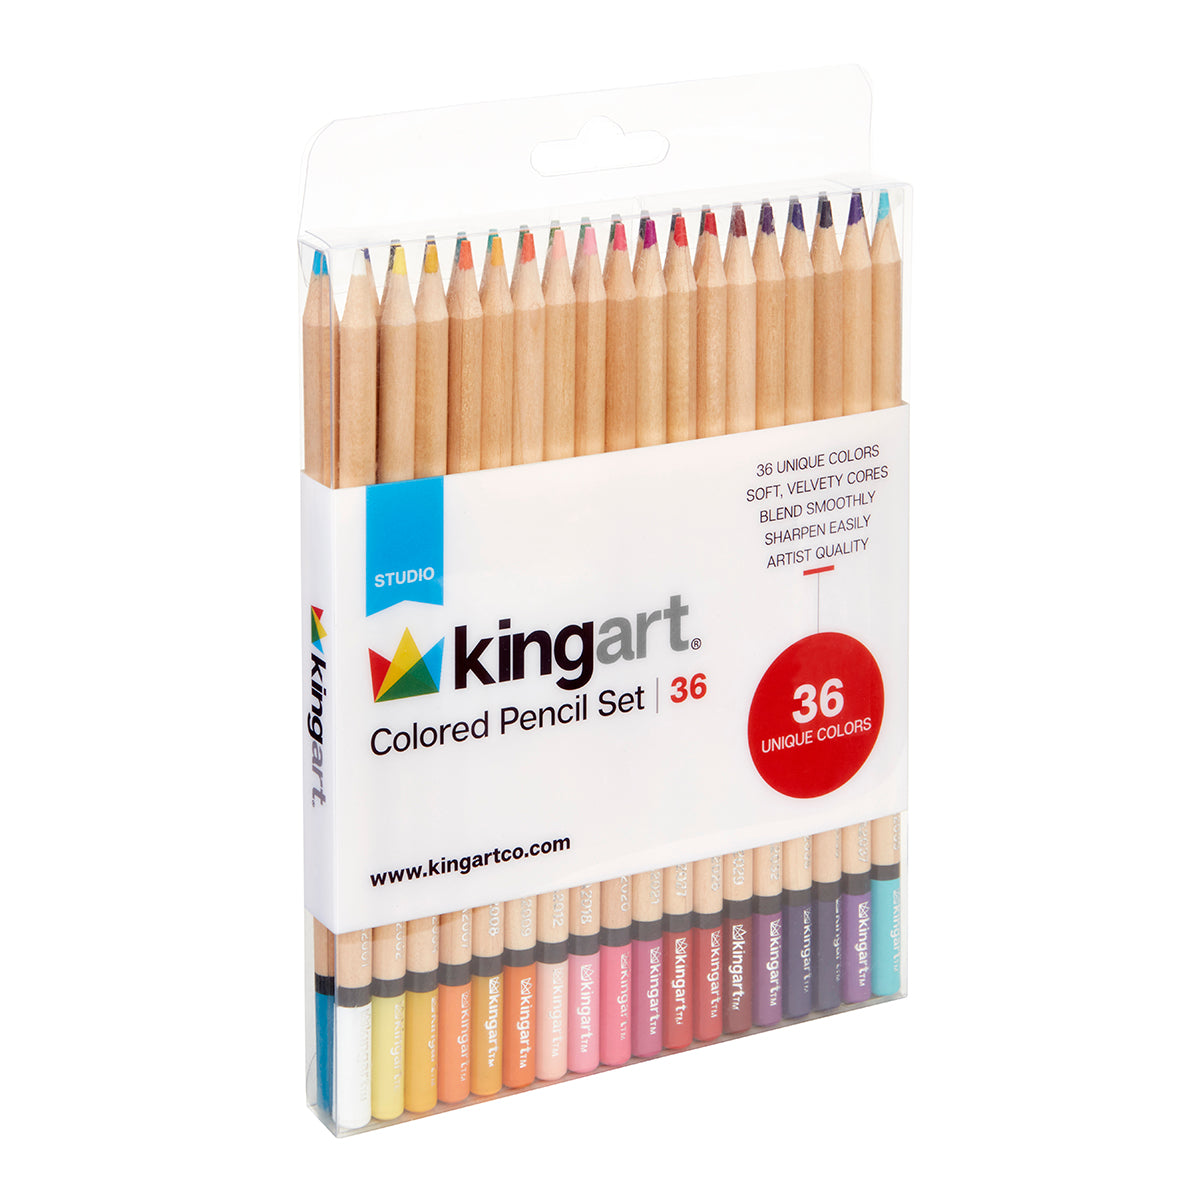 36 Colors Premium Colored Pencil Set, Perfect For Drawing And Coloring -  Soft Core, Holiday Gift For Artist Painting, Colored Pencils For Adults And  B